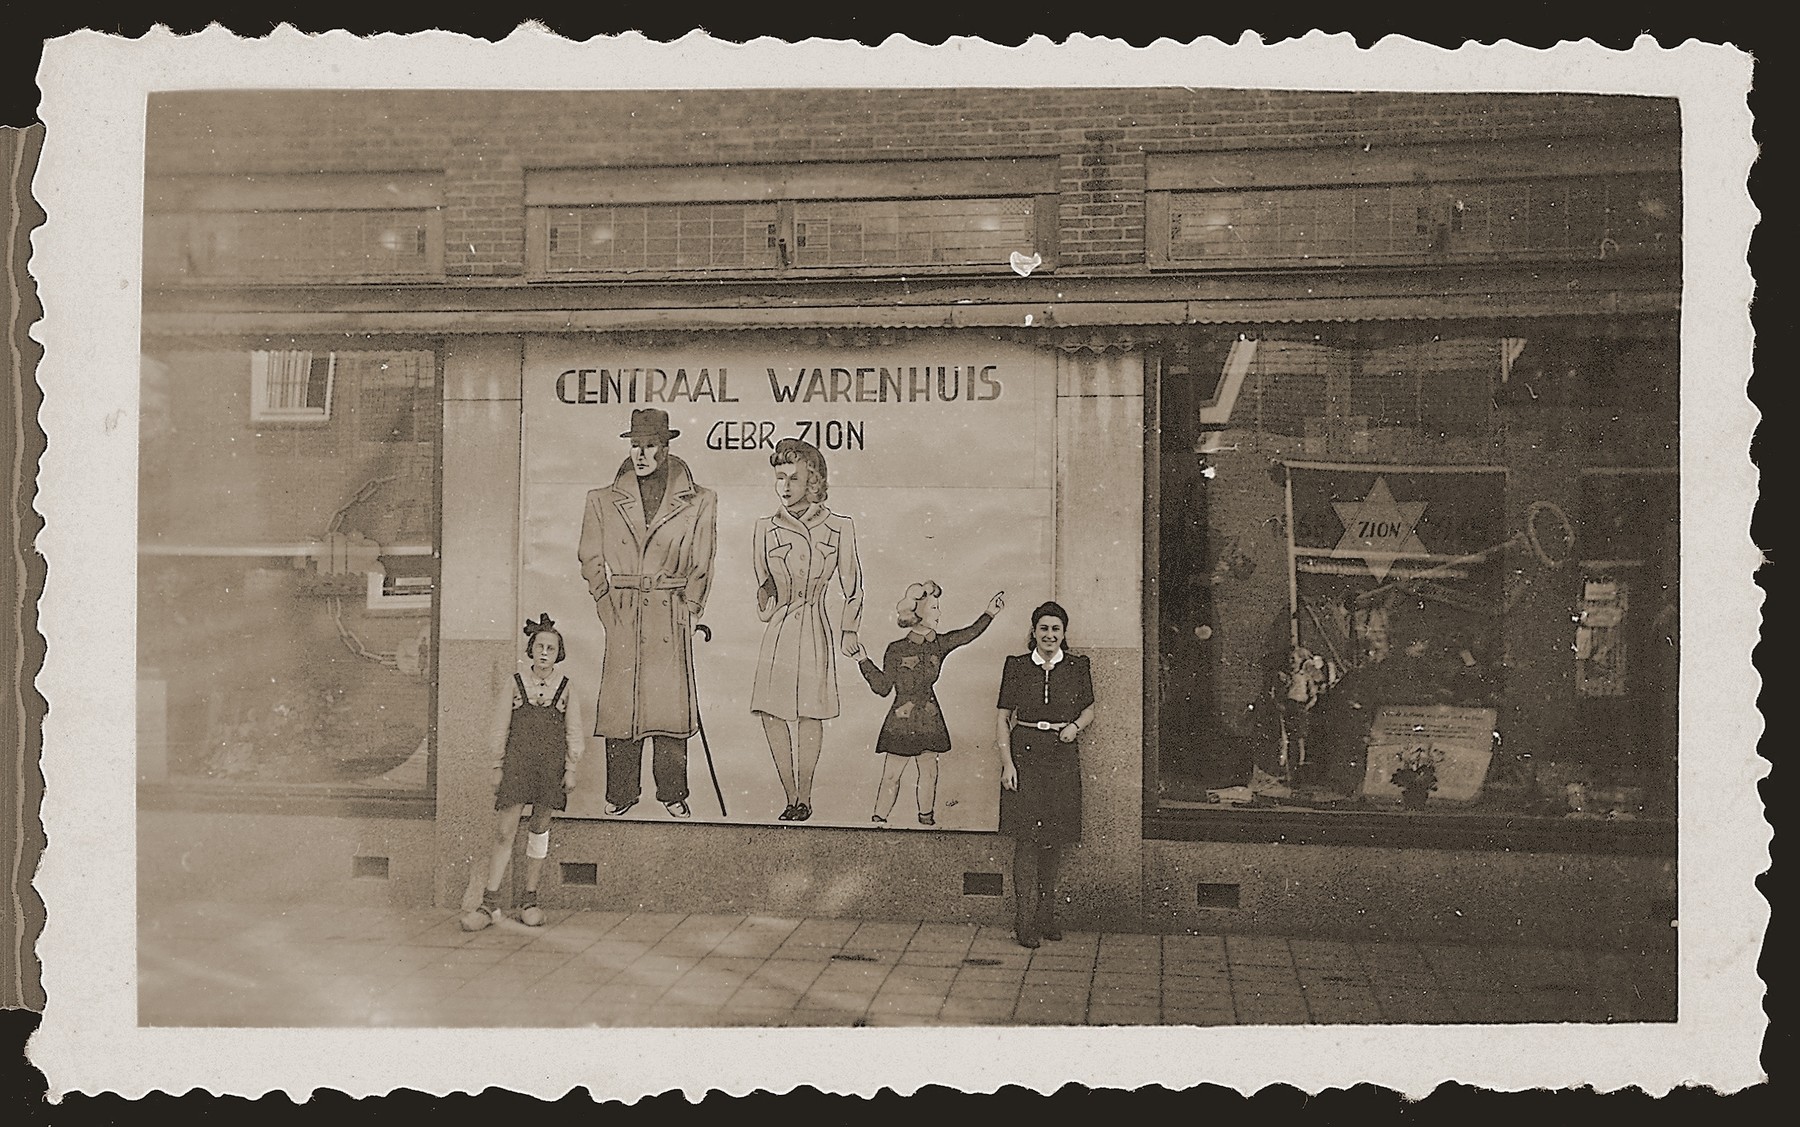 Bep Meijer (right) poses next to a billboard in the window of the newly reopened Zion clothing and fabric store in Eibergen.  The sign reads "Central Warehouse, Zion Brothers."